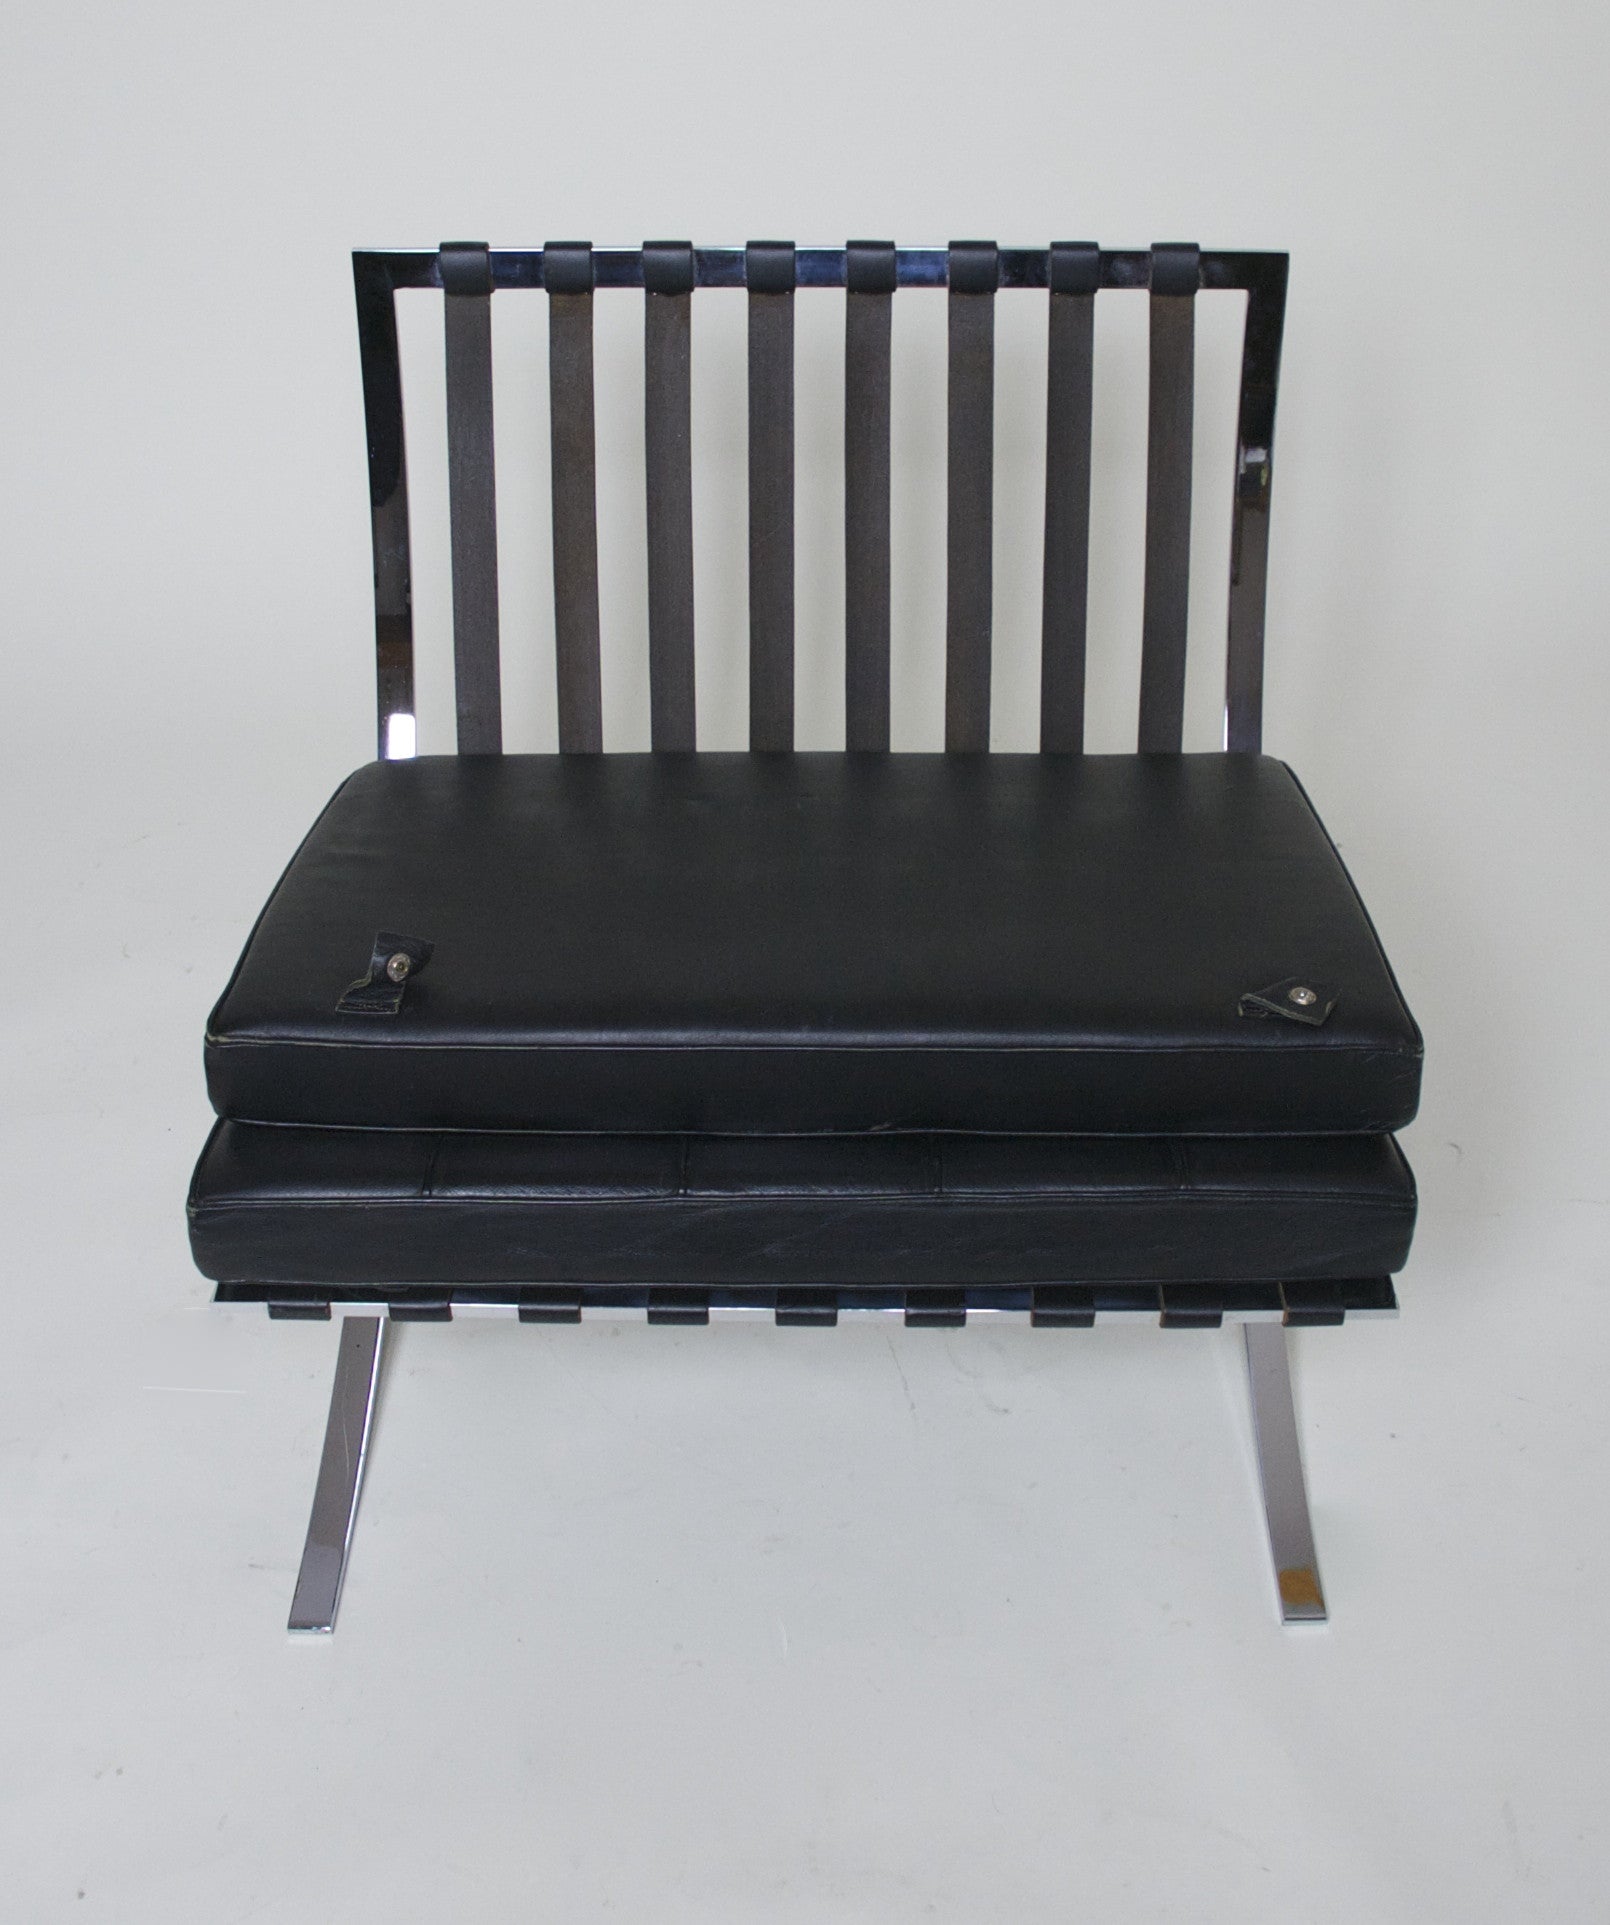 SOLD Knoll Barcelona Chair Mies Van Der Rohe Black Leather Gorgeous Condition #2 of 2